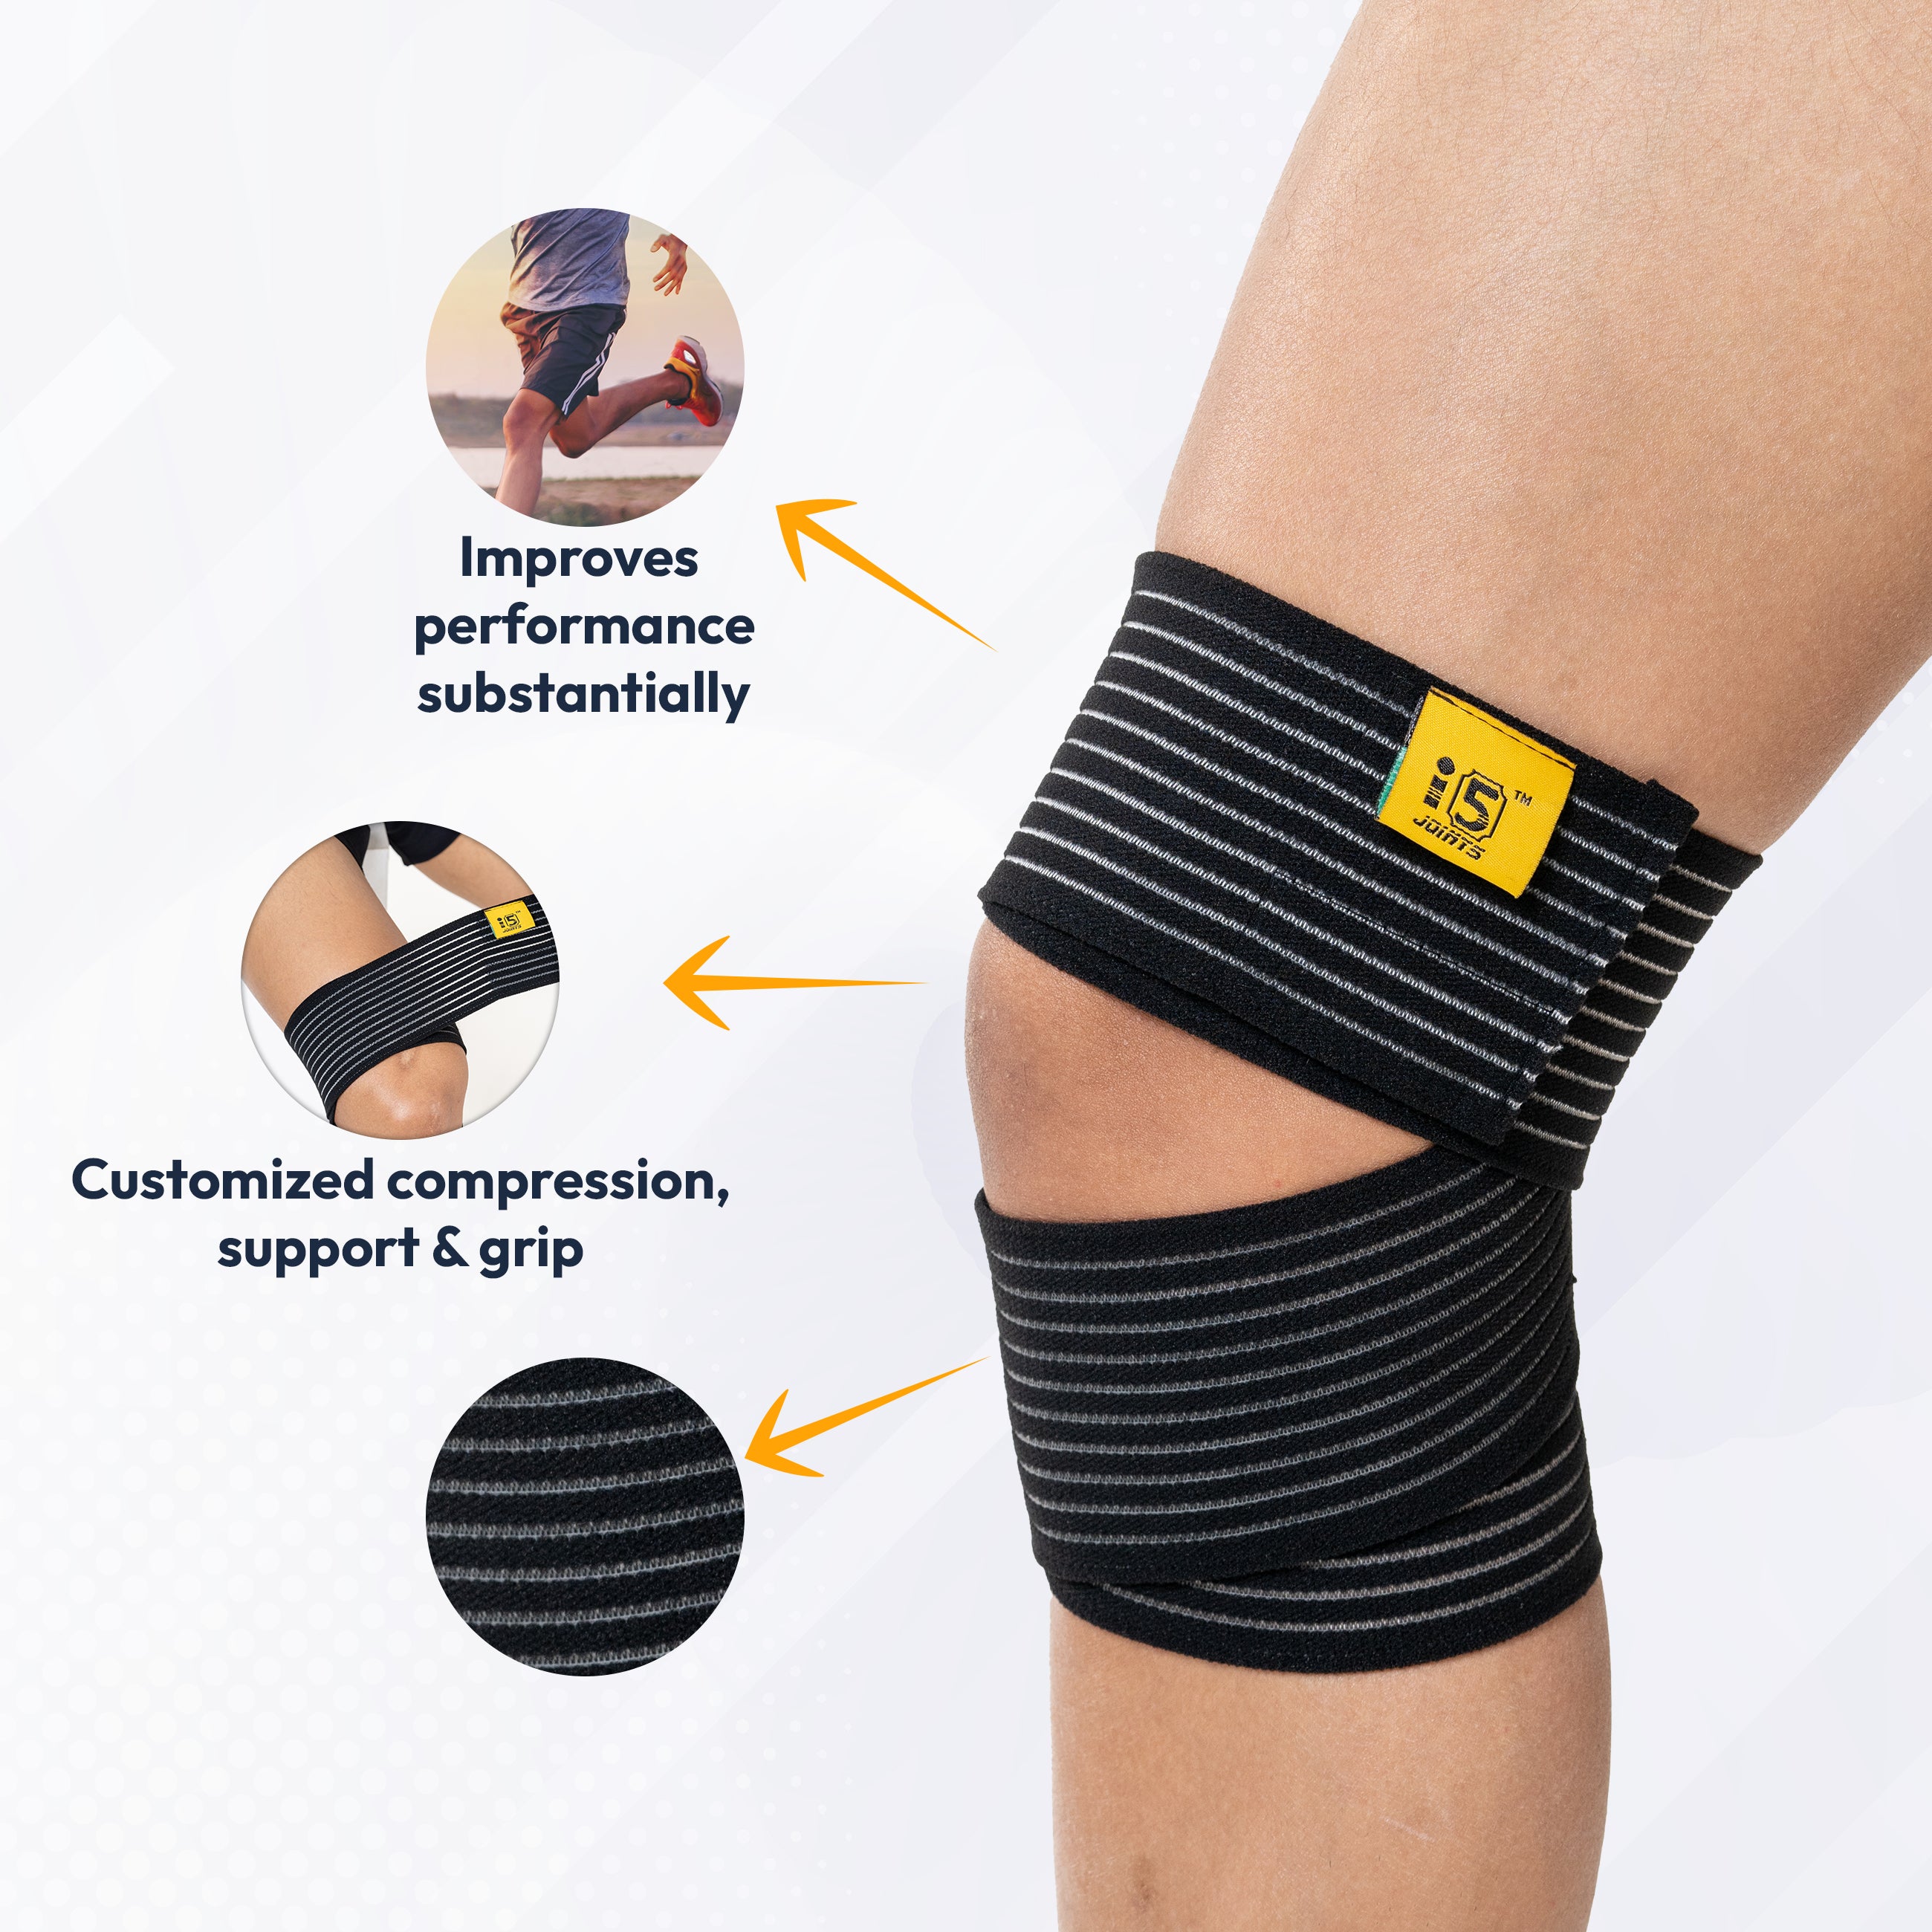 I5Joints-Multipurpose Strap(offers unparalleled adaptability,helps reduce swelling, alleviate pain, and promote healing)